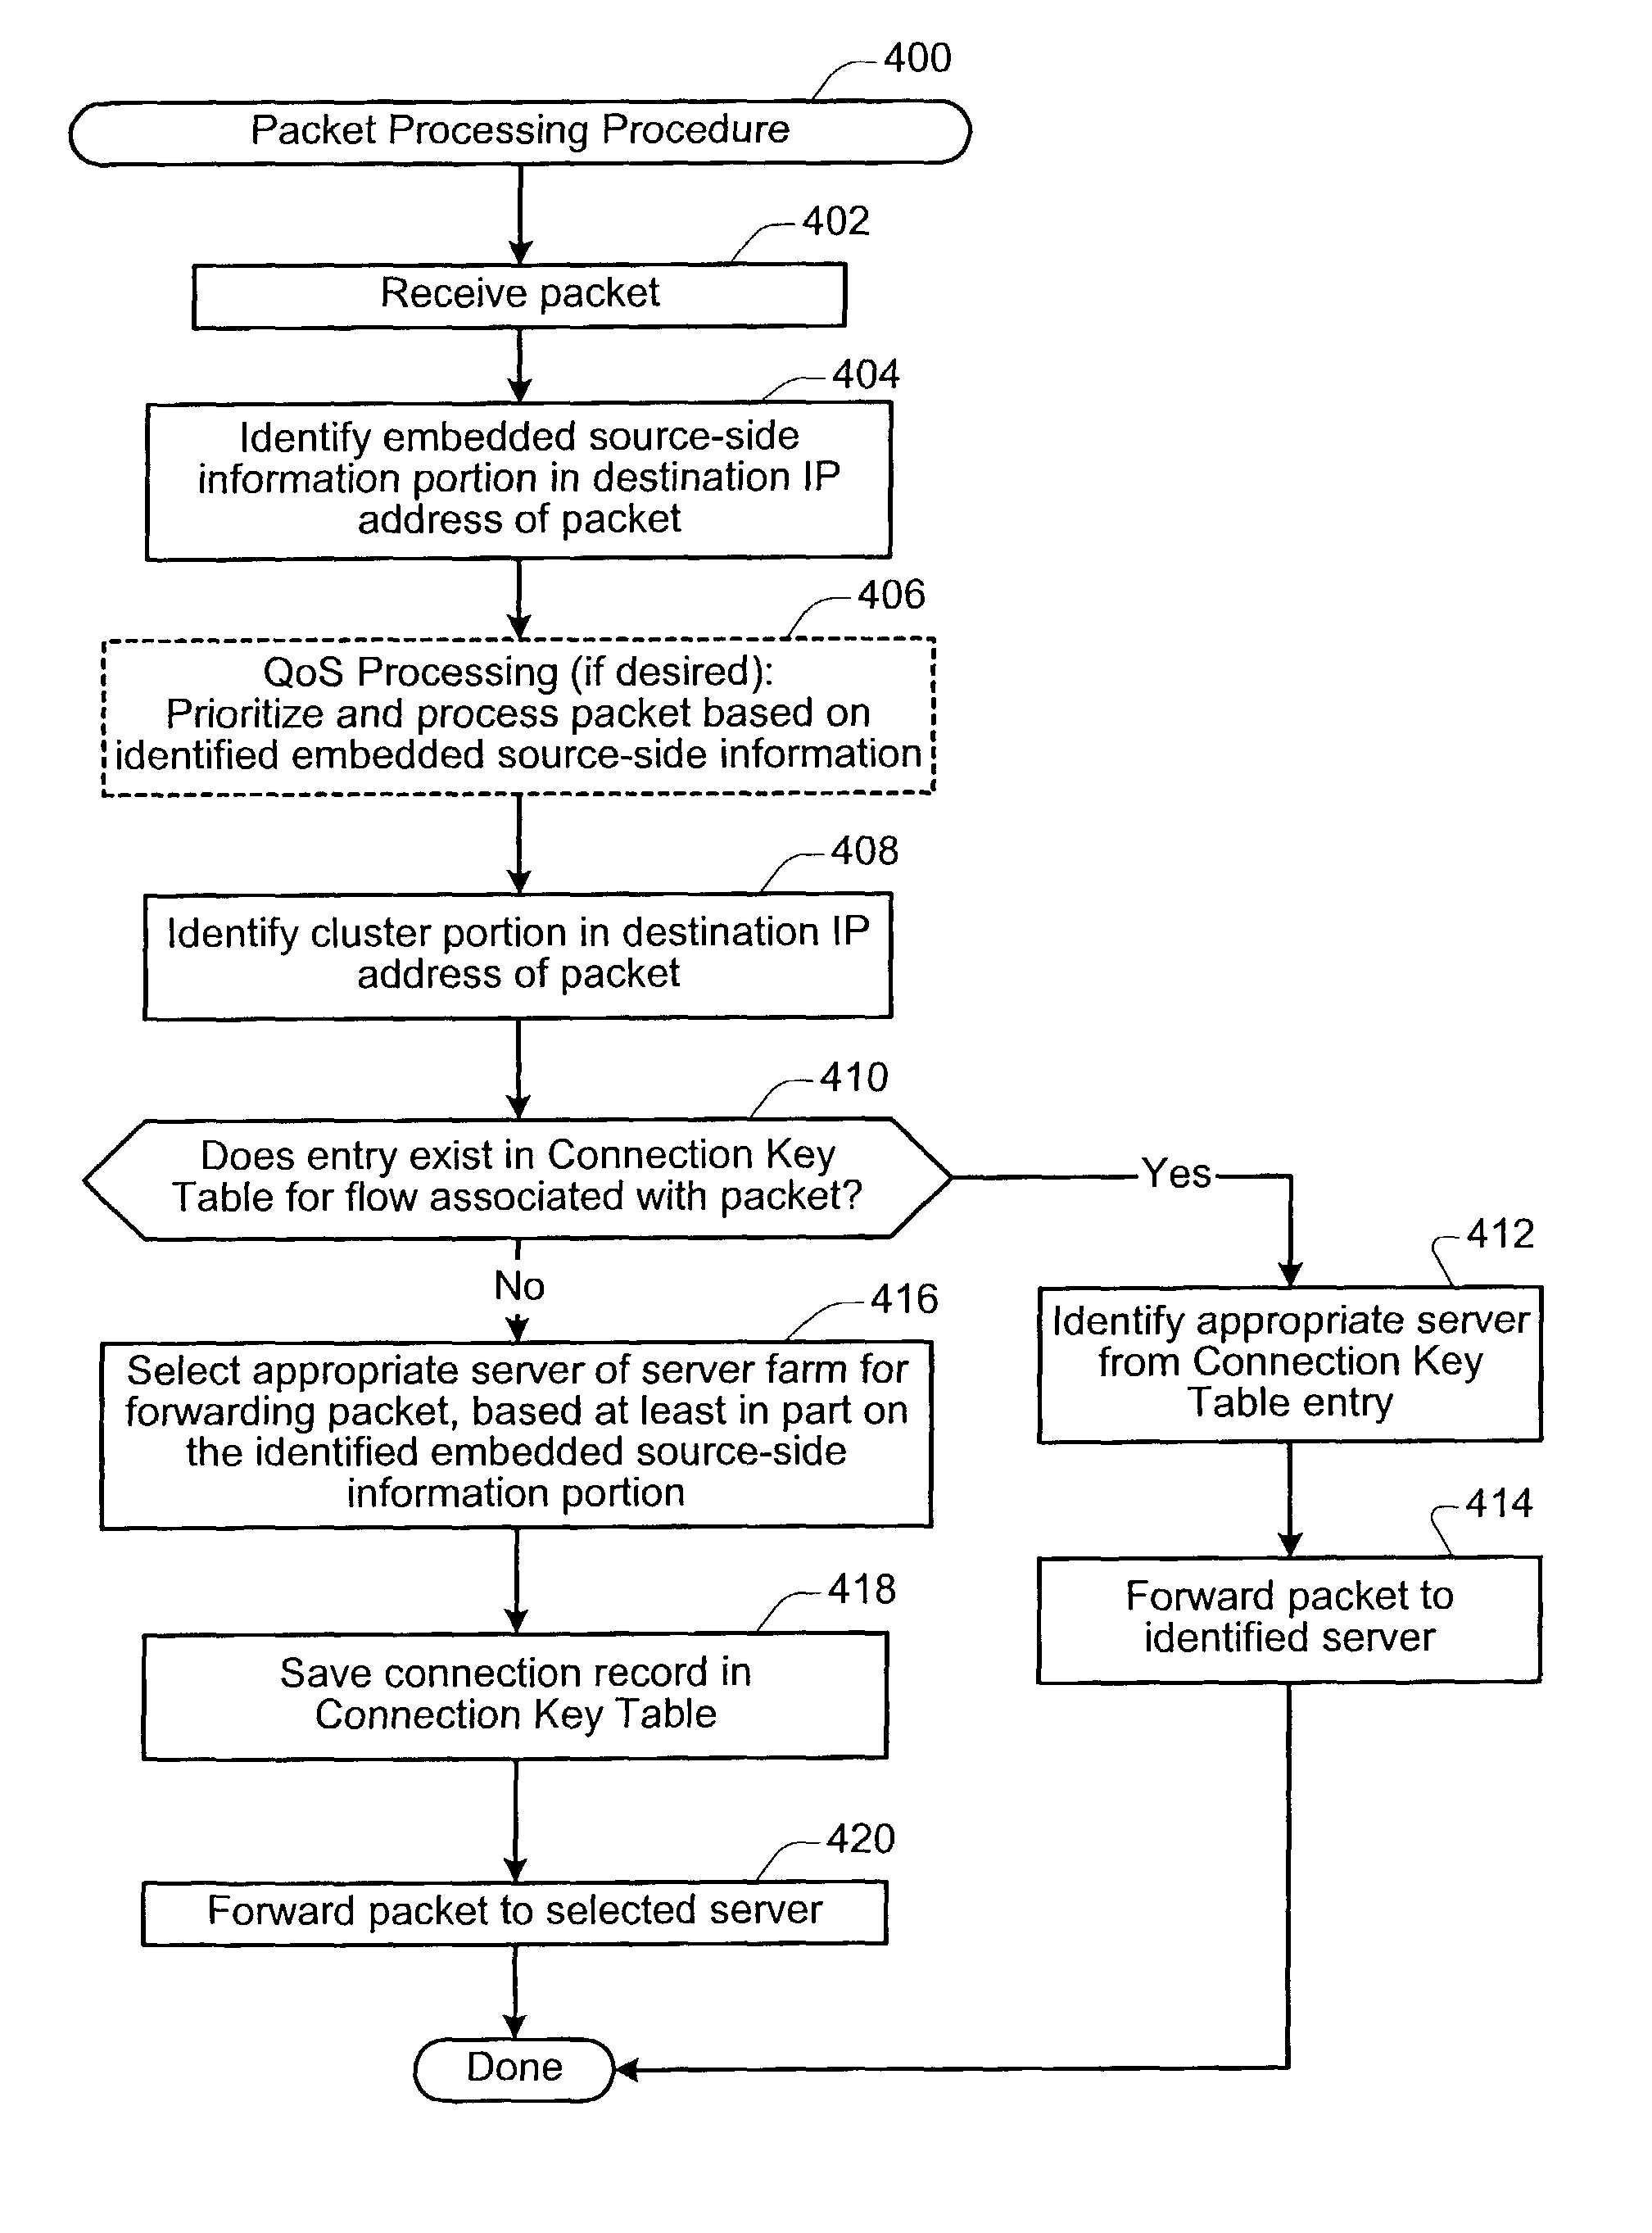 Technique for improving load balancing of traffic in a data network using source-side related information